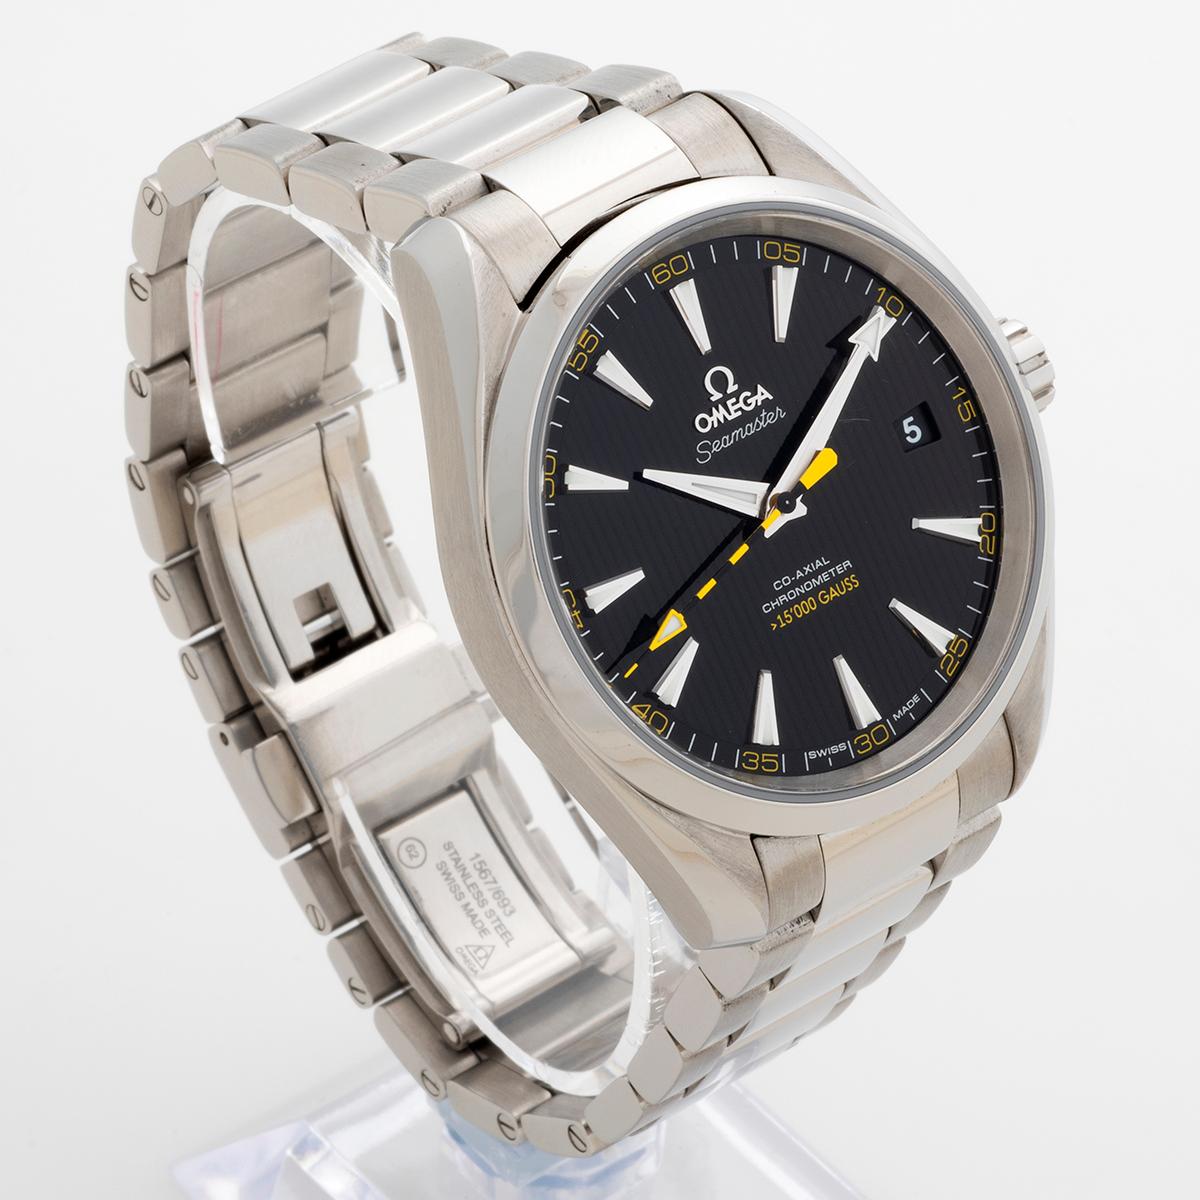 Women's or Men's Omega Seamaster Aqua Terra Wristwatch. Co-Axial Movement, Stainless Steel, 2014.